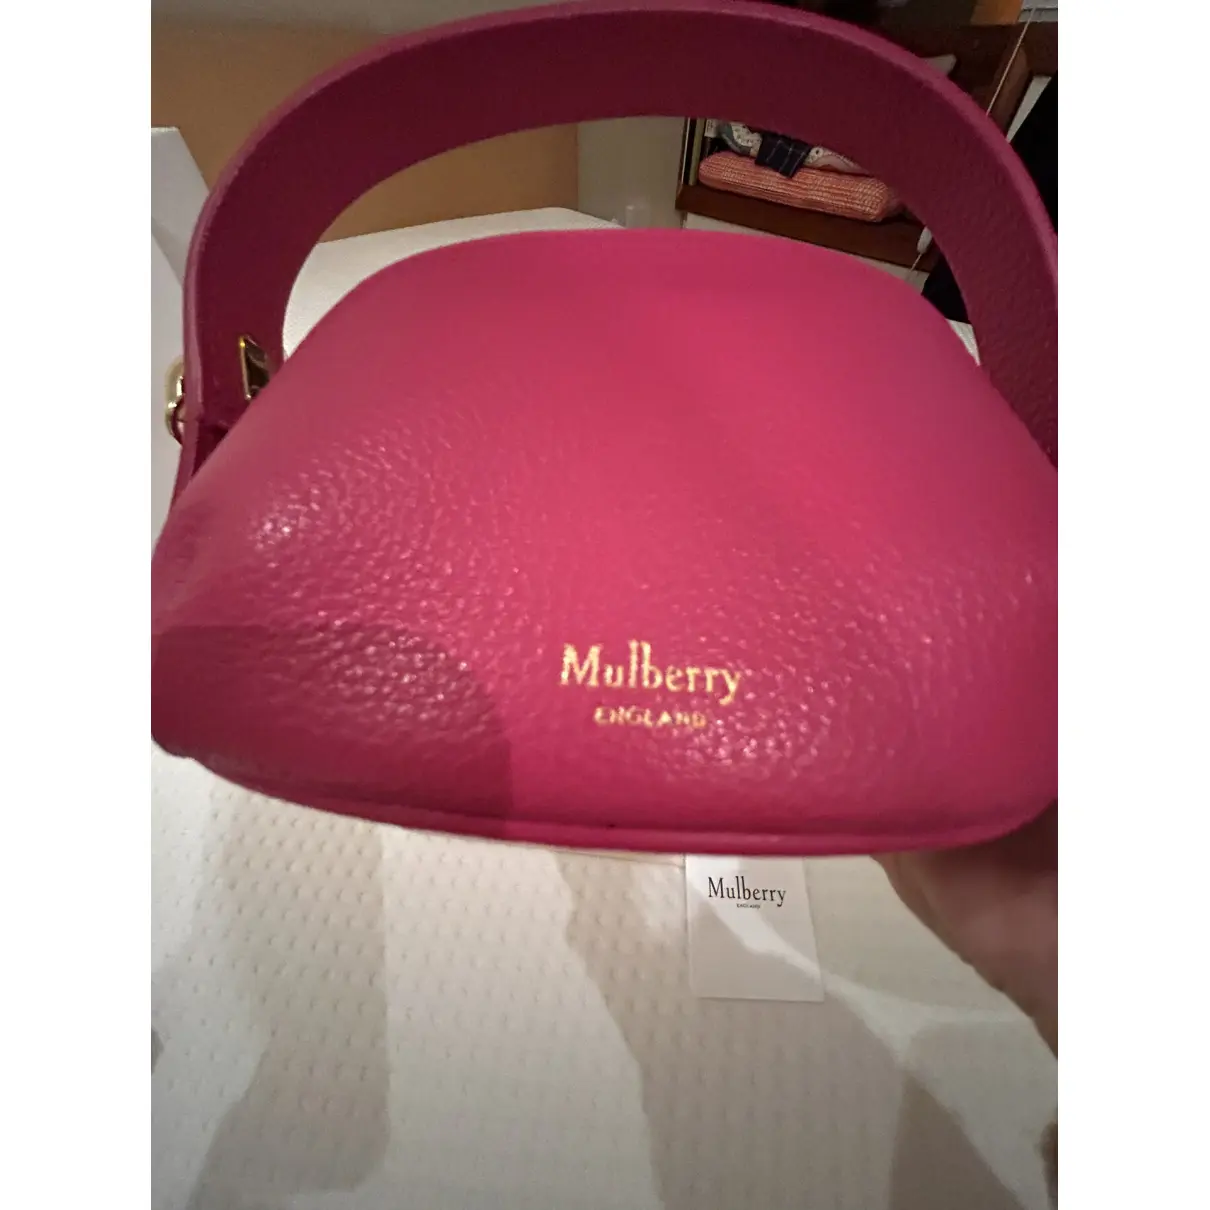 Buy Mulberry Leather clutch bag online